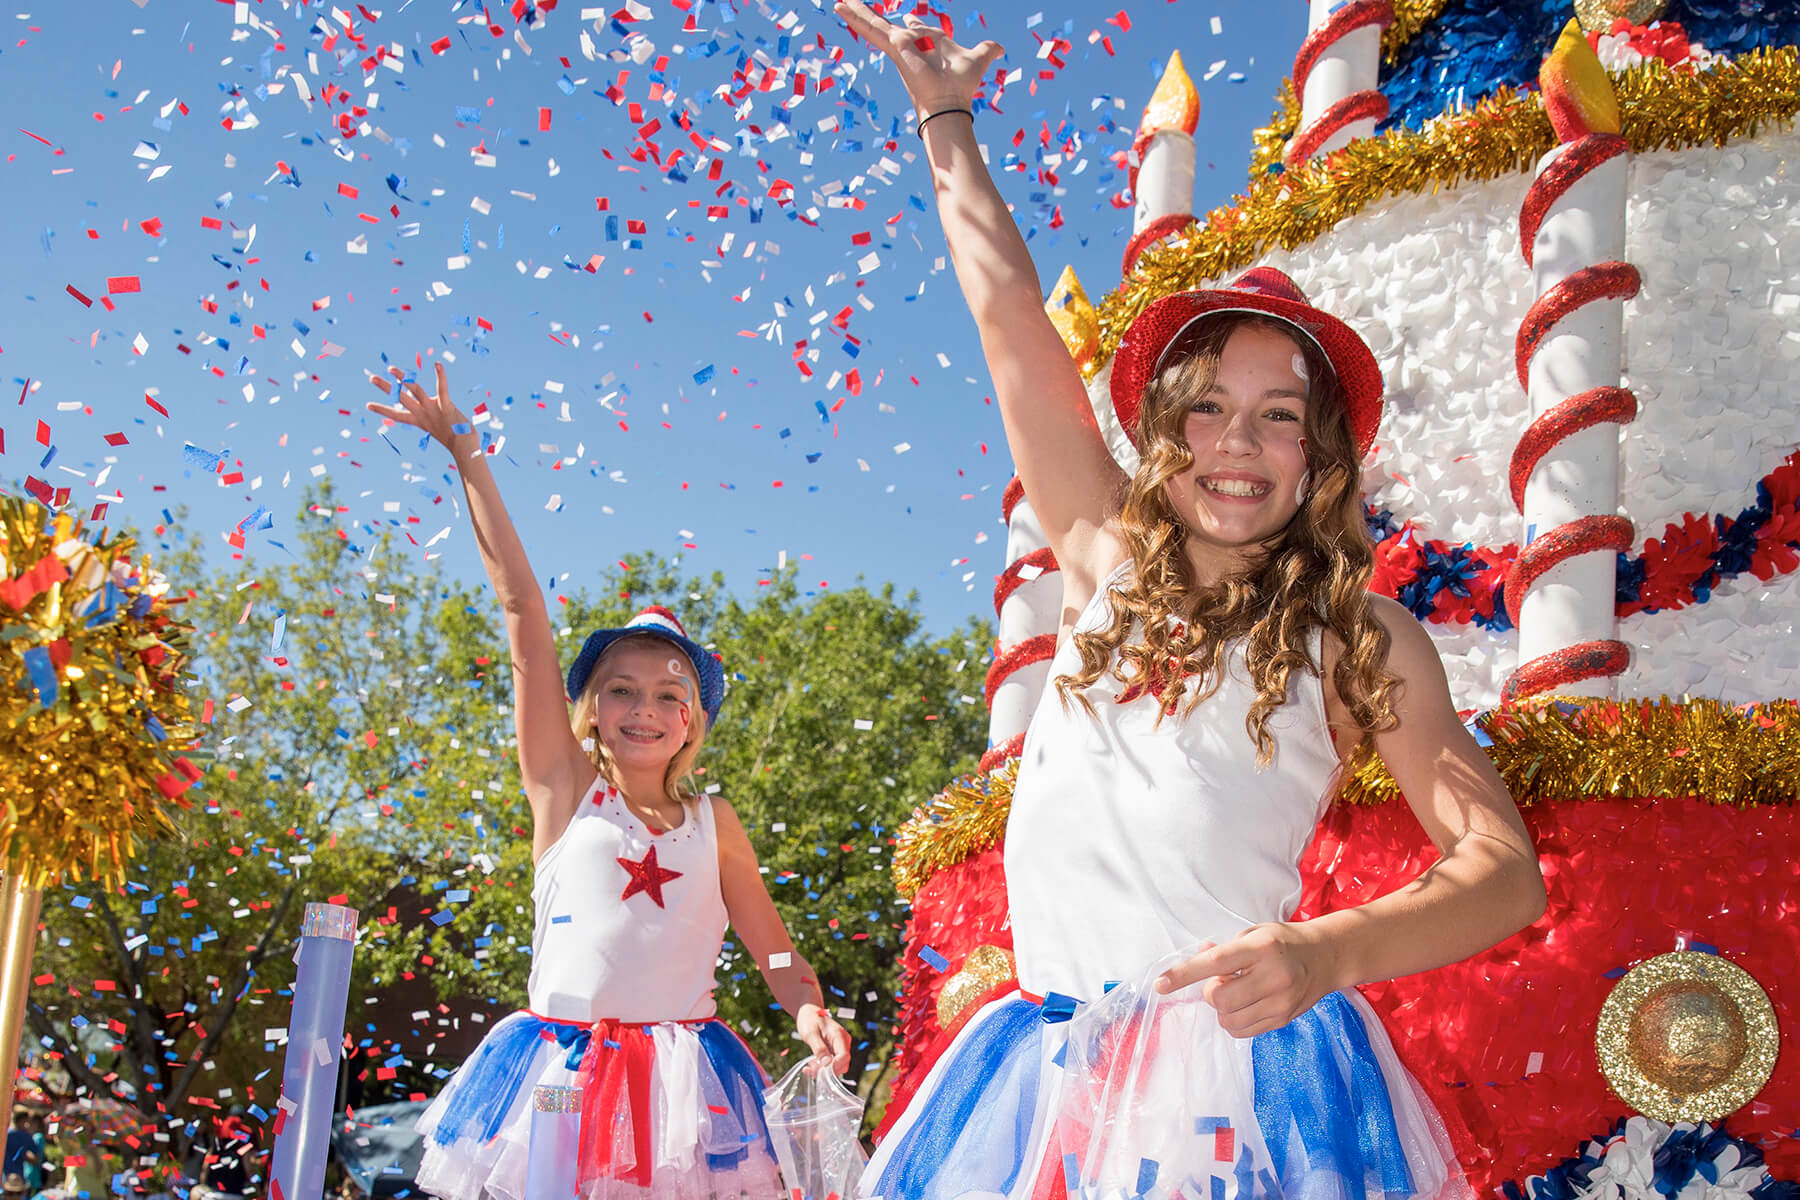 Float walkers toss confetti during the Summerlin Patriotic Parade